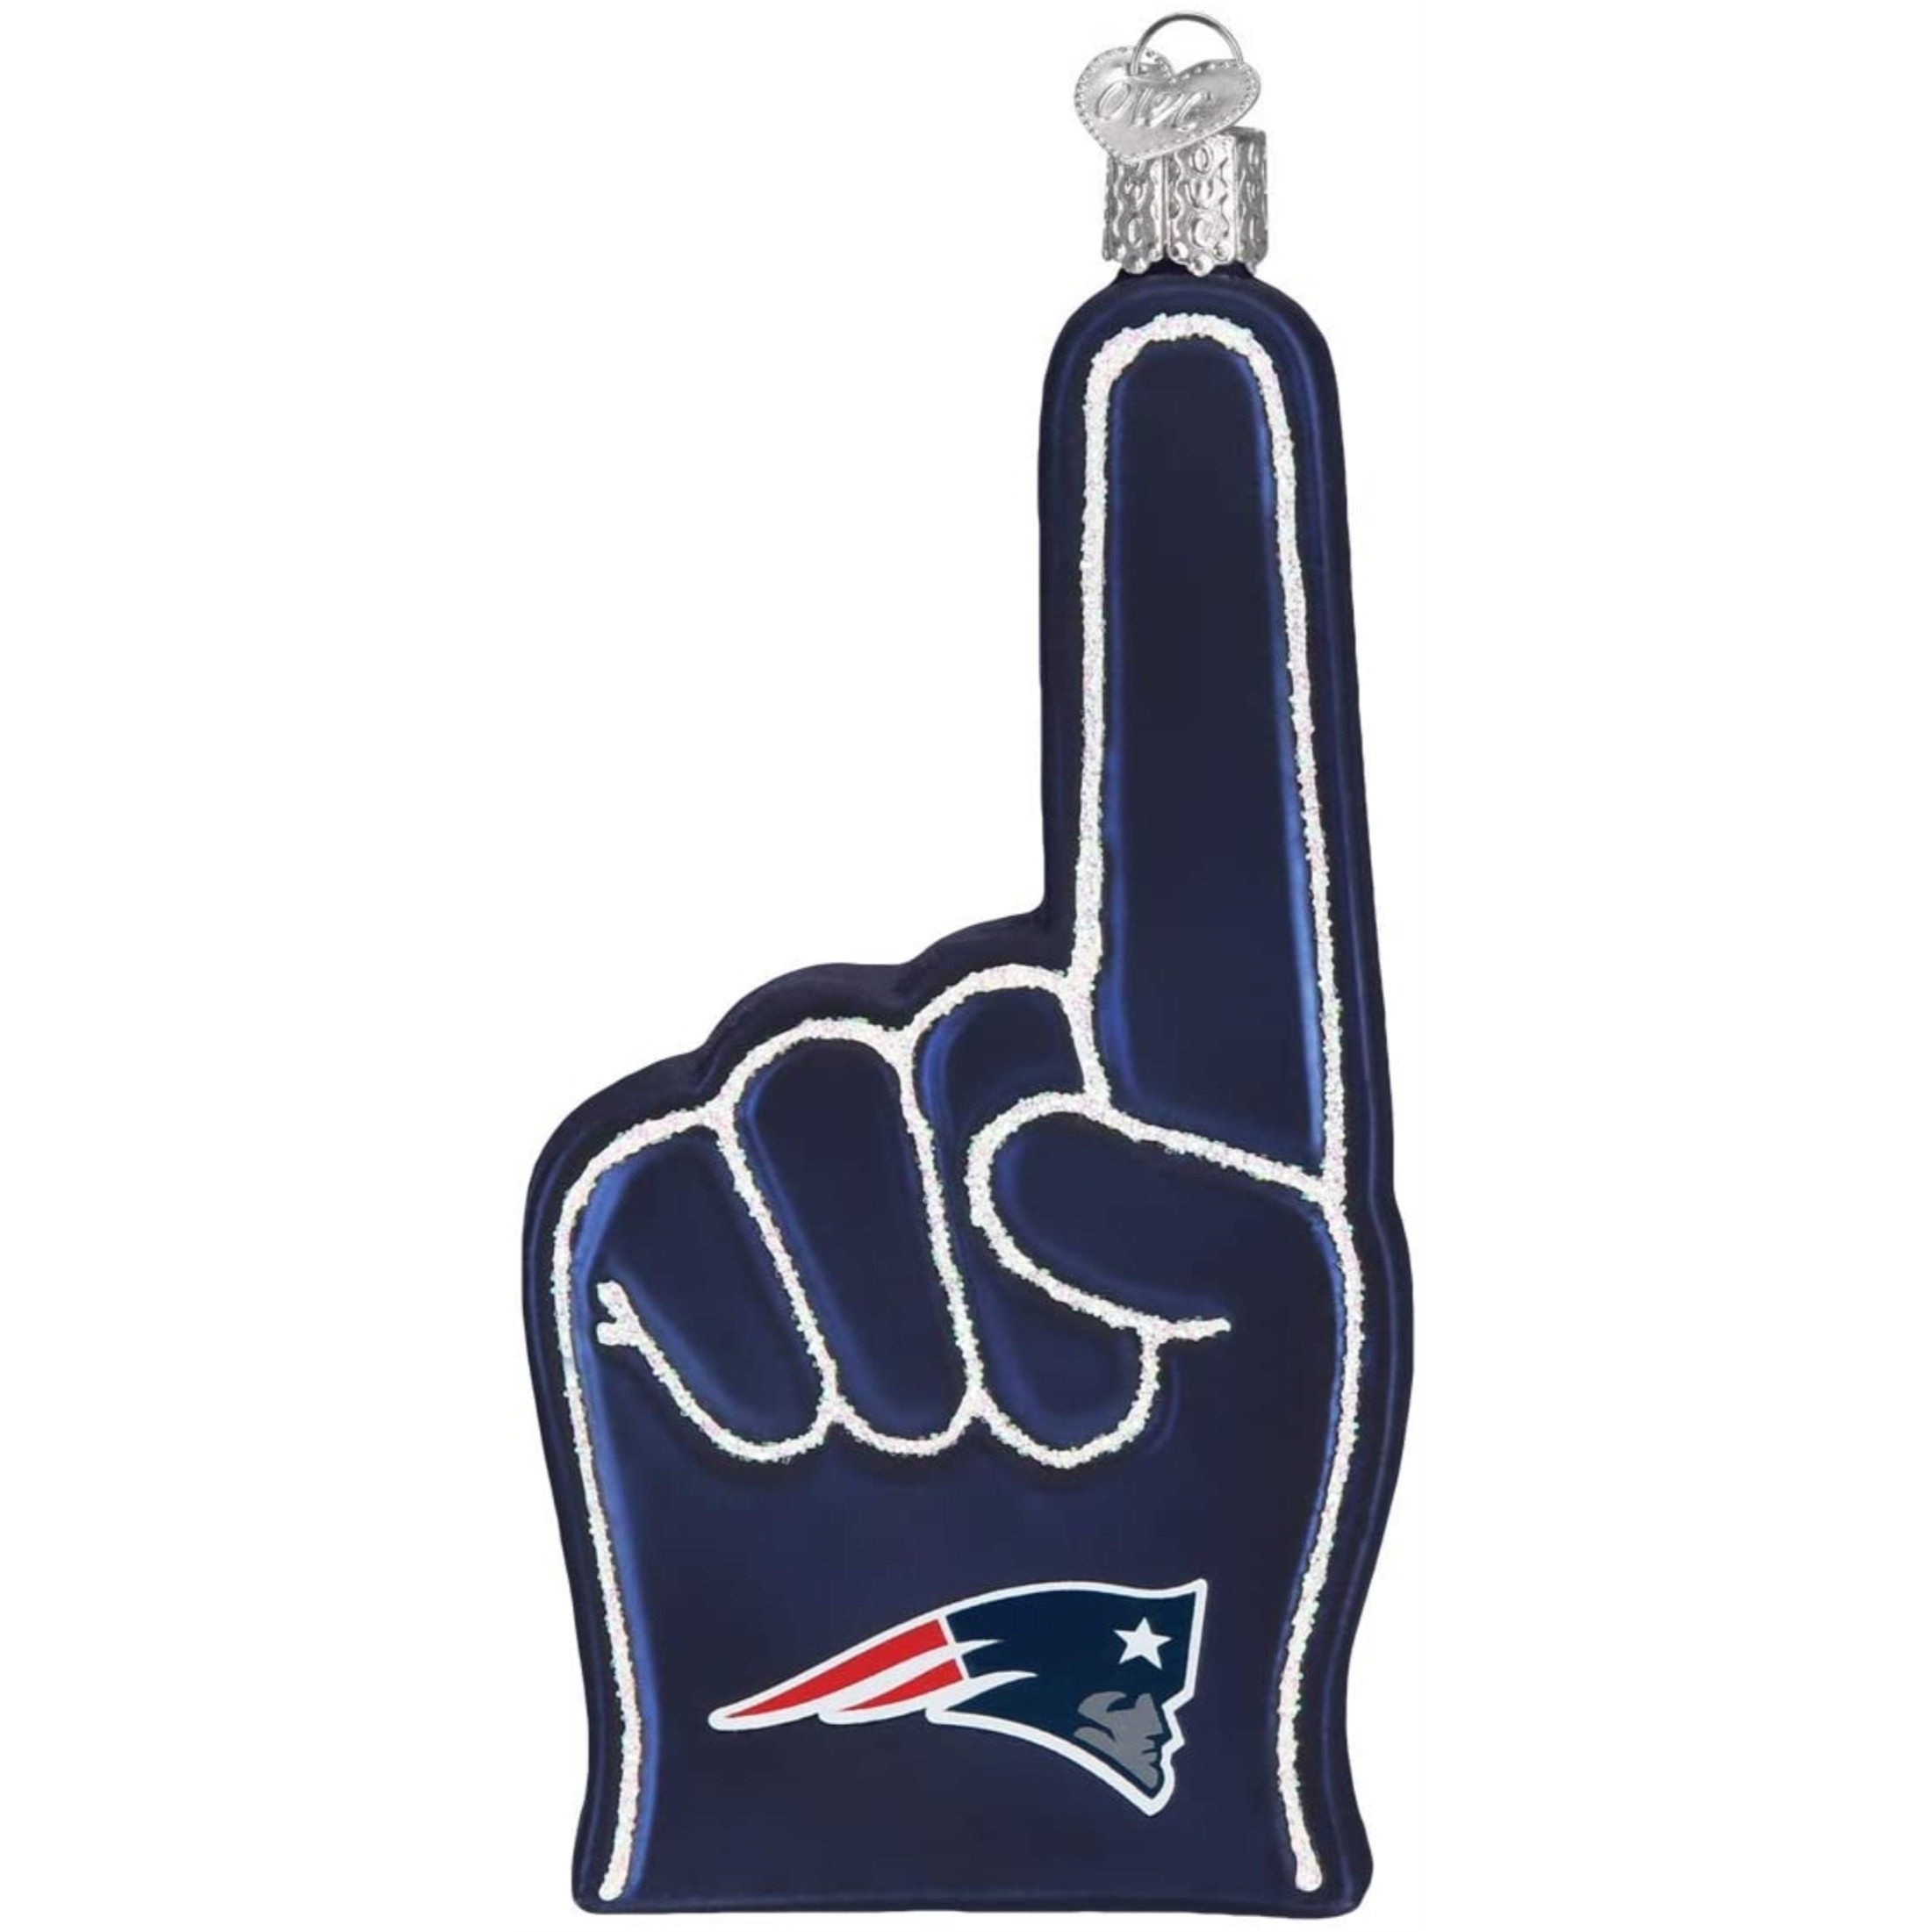 Old World Christmas Glass Blown Ornament For Christmas Tree, New England Patriots Foam Finger (With OWC Gift Box)